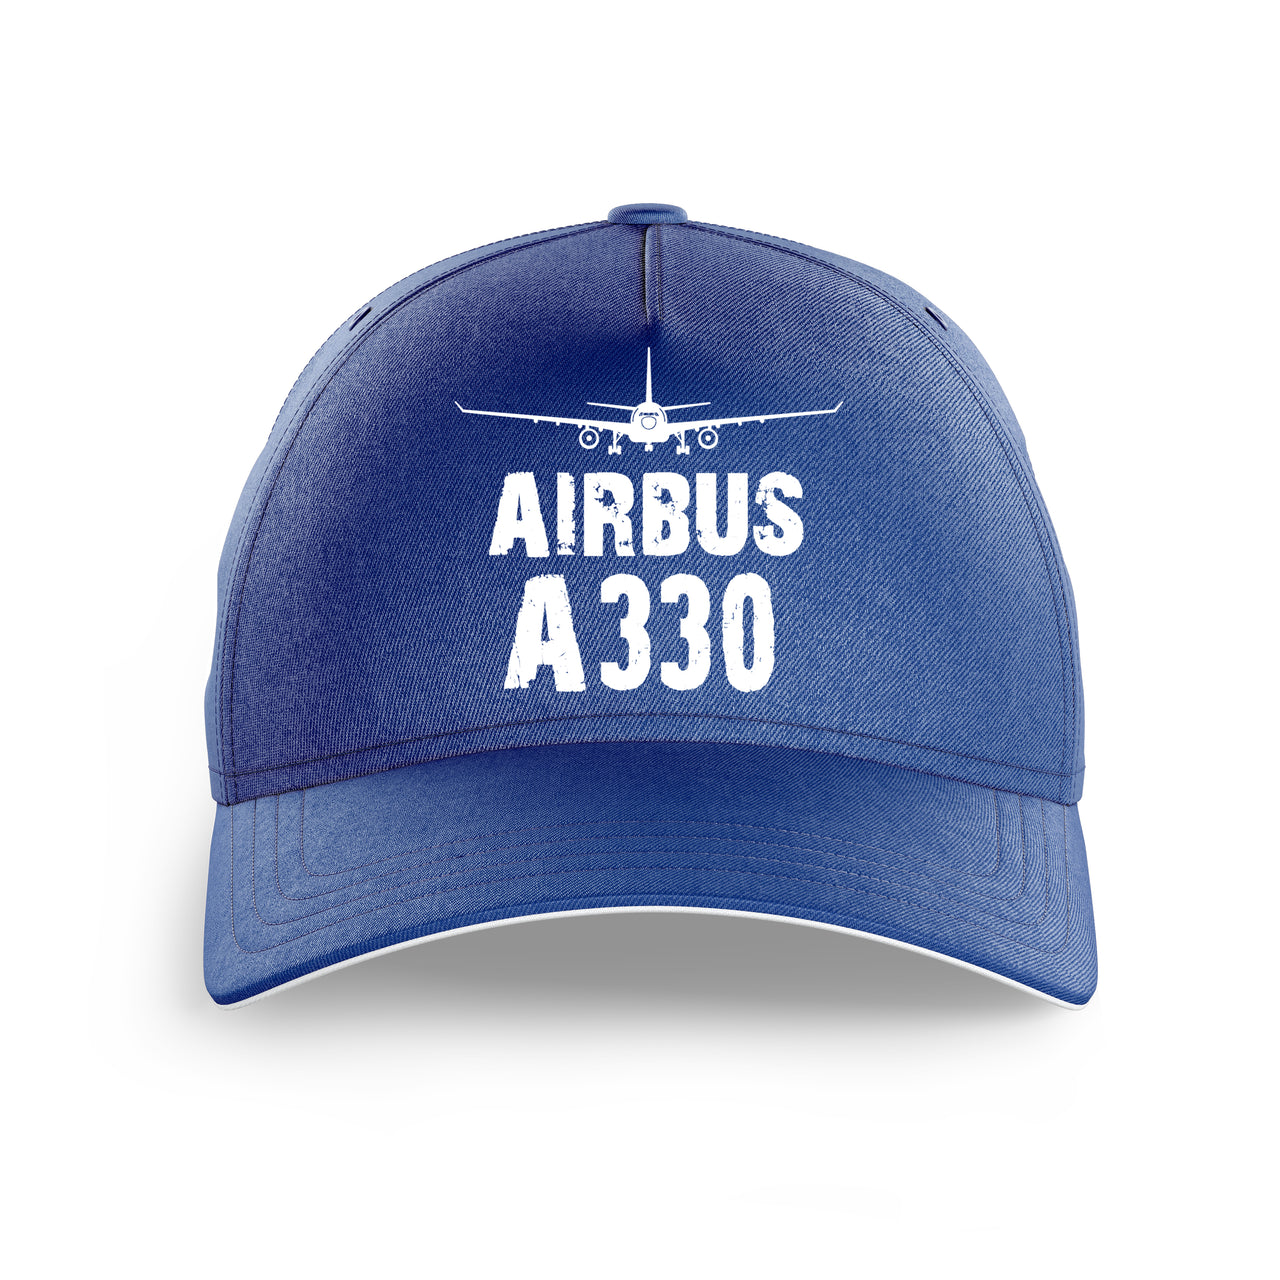 Airbus A330 & Plane Printed Hats